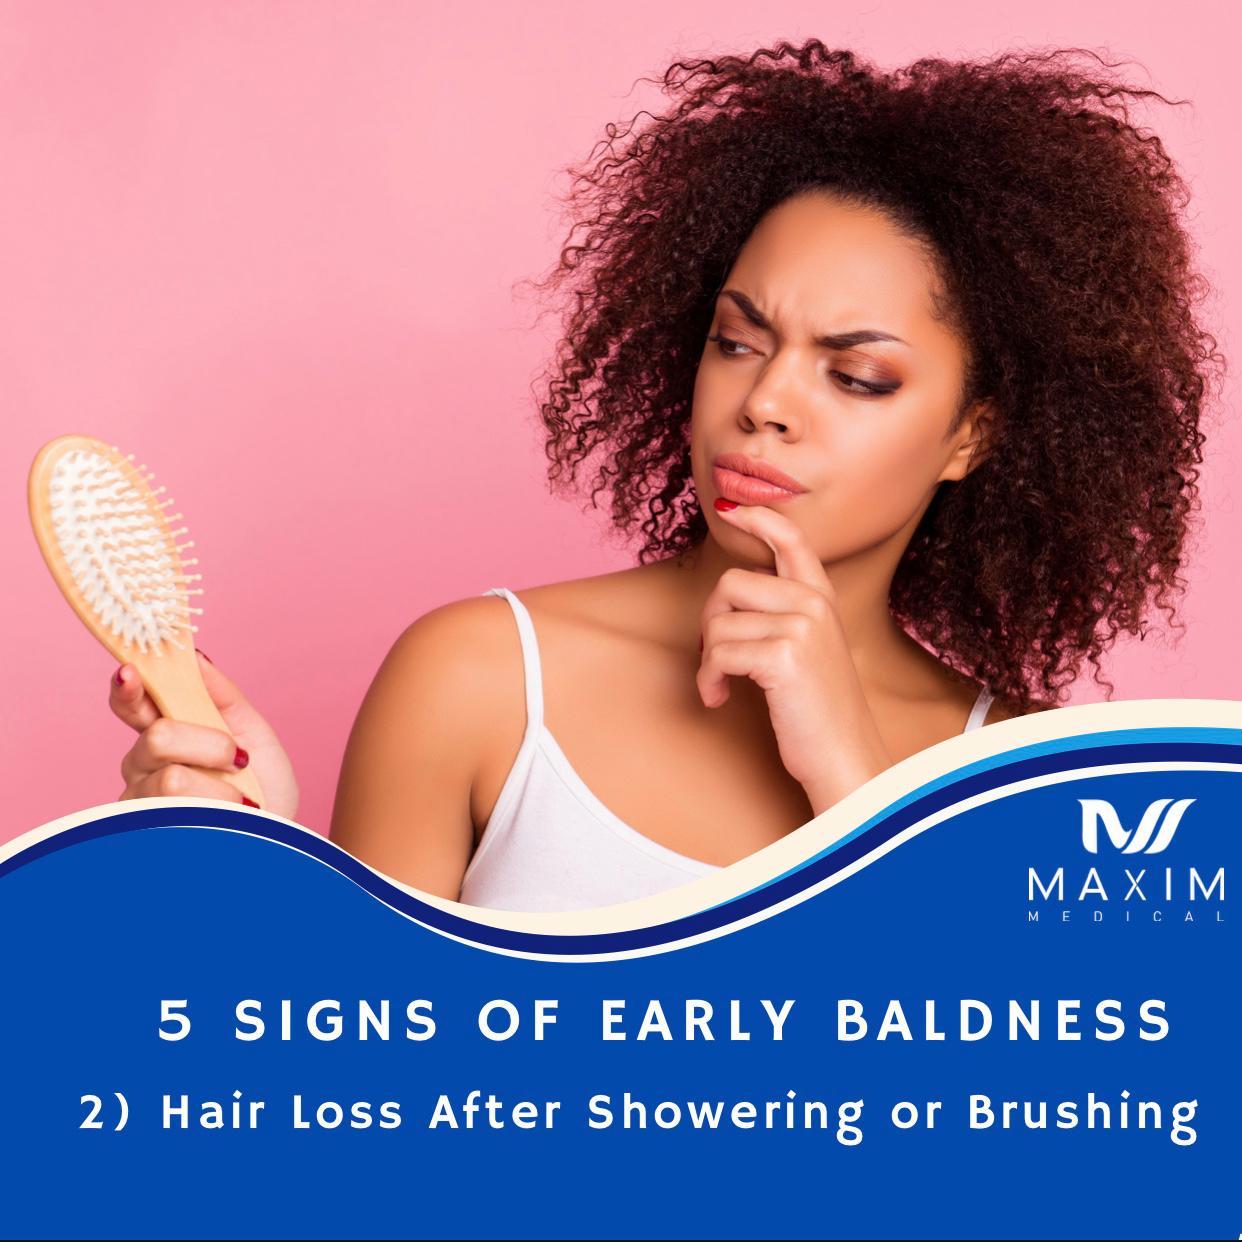 5 Signs Of Early Baldness

2. Excessive Hair Loss After Showering or Brushing
The average person sheds about 50 to 100 individual hairs a day. This happens throughout the day, not just when brushing one’s hair. However, if you feel like every time you run your brush through your hair or are noticing a ton of hairs in your hands while shampooing, then this may serve as early signs of hair loss. Another place to look for shedding hair is on the pillow you sleep on. While we sleep, many tend to move a lot throughout the night. Thus, this causes friction between the pillow and scalp which can result in shedding.